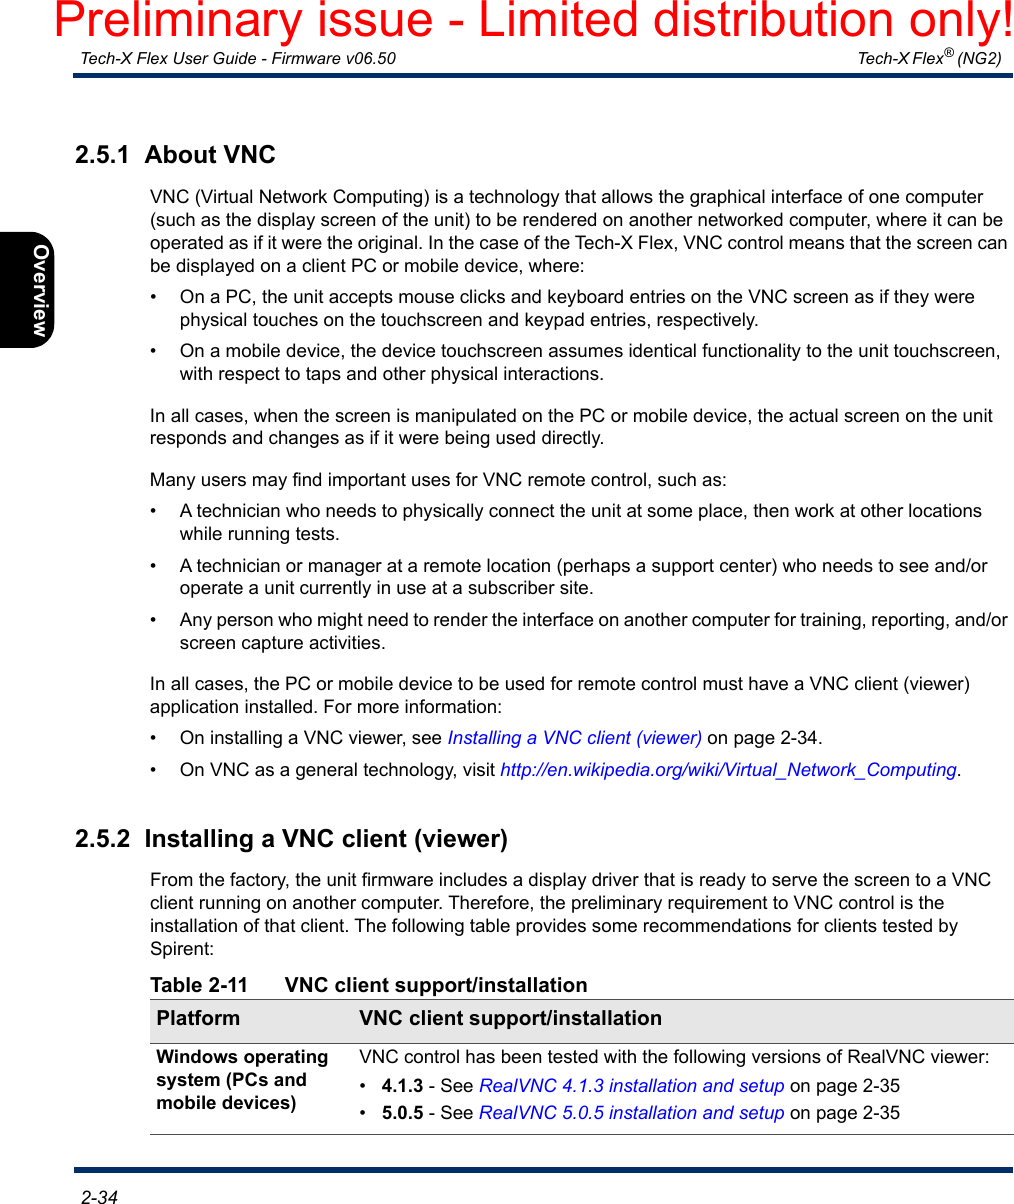  Tech-X Flex User Guide - Firmware v06.50   Tech-X Flex® (NG2)  2-34Intro Overview Wi-Fi Ethernet System IP/Video MoCA RF Specs2.5.1  About VNCVNC (Virtual Network Computing) is a technology that allows the graphical interface of one computer (such as the display screen of the unit) to be rendered on another networked computer, where it can be operated as if it were the original. In the case of the Tech-X Flex, VNC control means that the screen can be displayed on a client PC or mobile device, where:• On a PC, the unit accepts mouse clicks and keyboard entries on the VNC screen as if they were physical touches on the touchscreen and keypad entries, respectively.• On a mobile device, the device touchscreen assumes identical functionality to the unit touchscreen, with respect to taps and other physical interactions.In all cases, when the screen is manipulated on the PC or mobile device, the actual screen on the unit responds and changes as if it were being used directly.Many users may find important uses for VNC remote control, such as:• A technician who needs to physically connect the unit at some place, then work at other locations while running tests.• A technician or manager at a remote location (perhaps a support center) who needs to see and/or operate a unit currently in use at a subscriber site.• Any person who might need to render the interface on another computer for training, reporting, and/or screen capture activities.In all cases, the PC or mobile device to be used for remote control must have a VNC client (viewer) application installed. For more information:• On installing a VNC viewer, see Installing a VNC client (viewer) on page 2-34.• On VNC as a general technology, visit http://en.wikipedia.org/wiki/Virtual_Network_Computing.2.5.2  Installing a VNC client (viewer)From the factory, the unit firmware includes a display driver that is ready to serve the screen to a VNC client running on another computer. Therefore, the preliminary requirement to VNC control is the installation of that client. The following table provides some recommendations for clients tested by Spirent:Table 2-11 VNC client support/installationPlatform VNC client support/installationWindows operating system (PCs and mobile devices)VNC control has been tested with the following versions of RealVNC viewer:•4.1.3 - See RealVNC 4.1.3 installation and setup on page 2-35•5.0.5 - See RealVNC 5.0.5 installation and setup on page 2-35Preliminary issue - Limited distribution only!